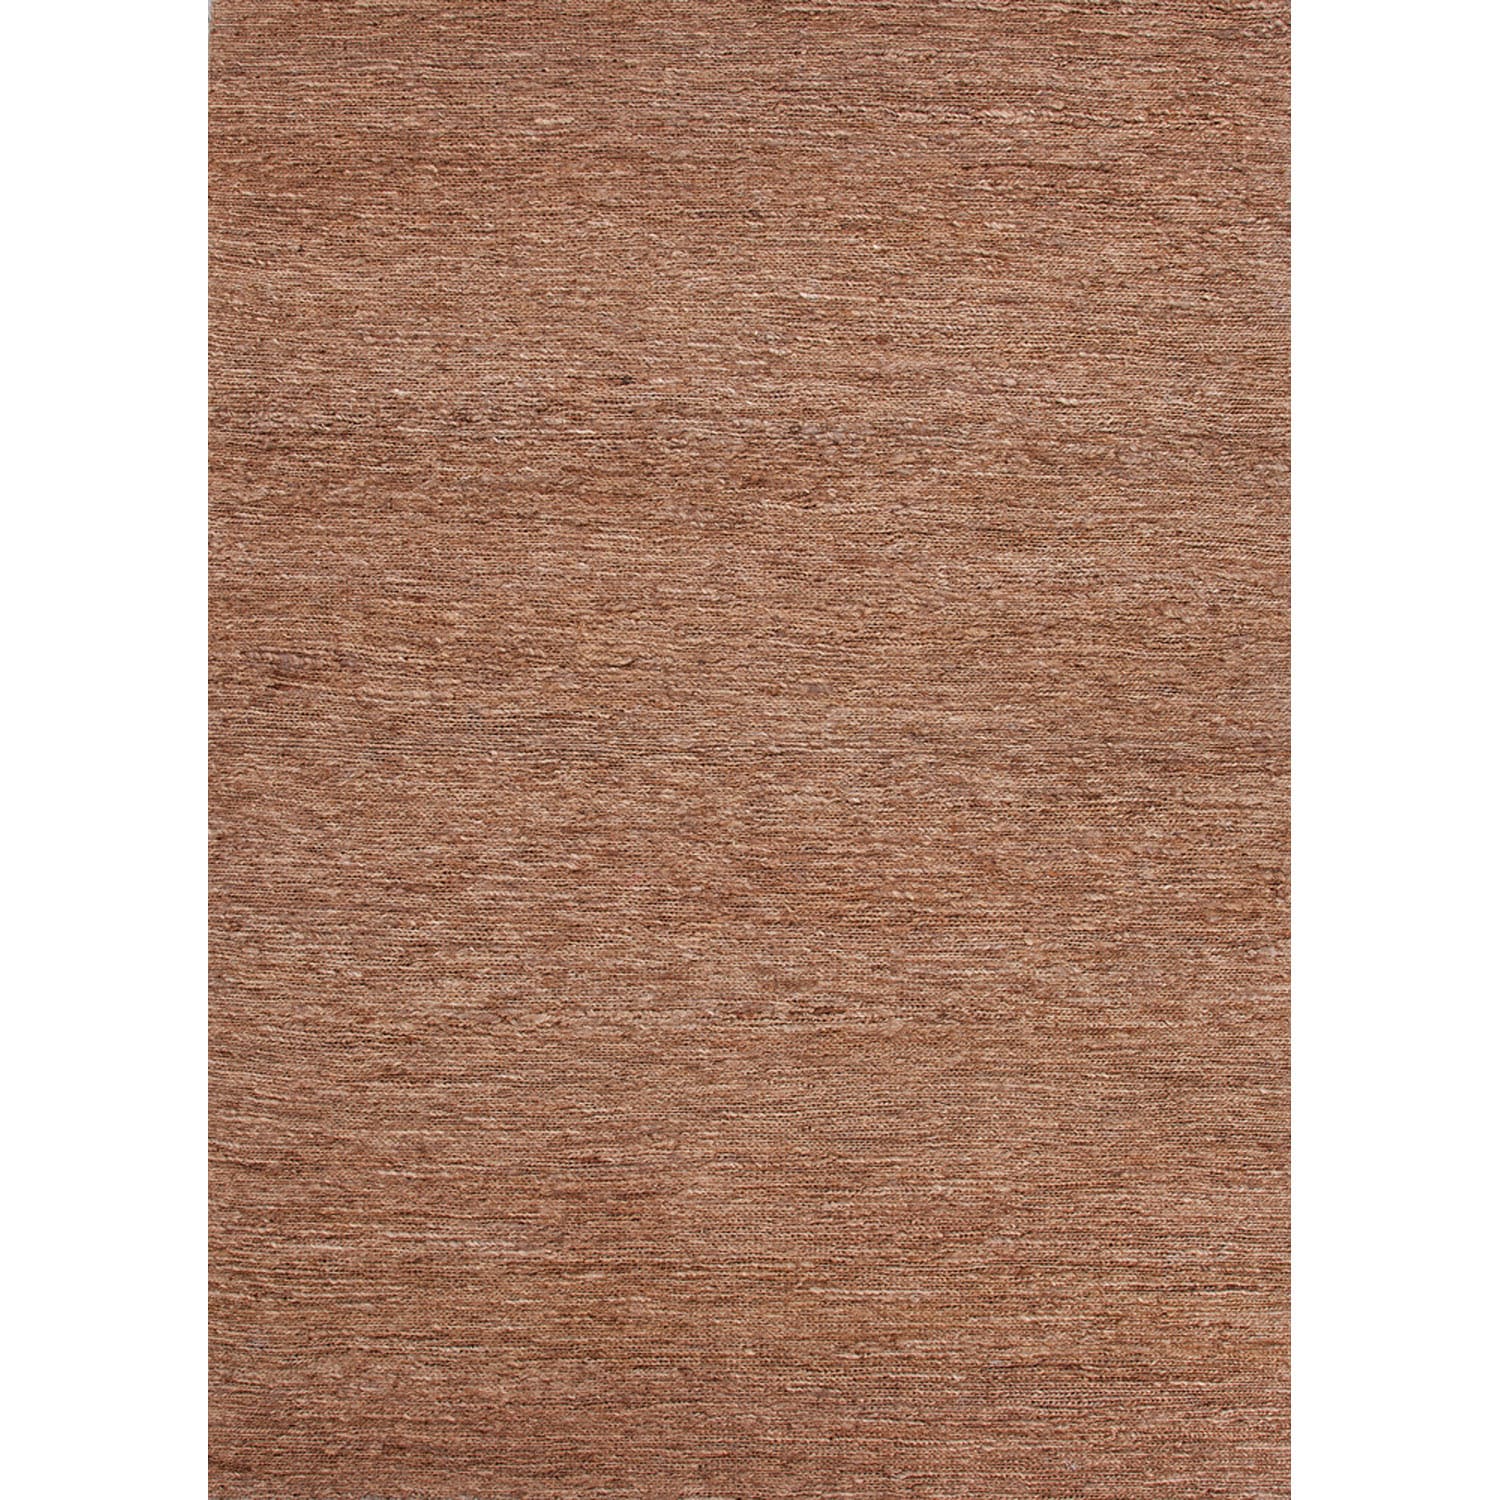 Handwoven Naturals Solid pattern Brown Area Rug (8 X 10)